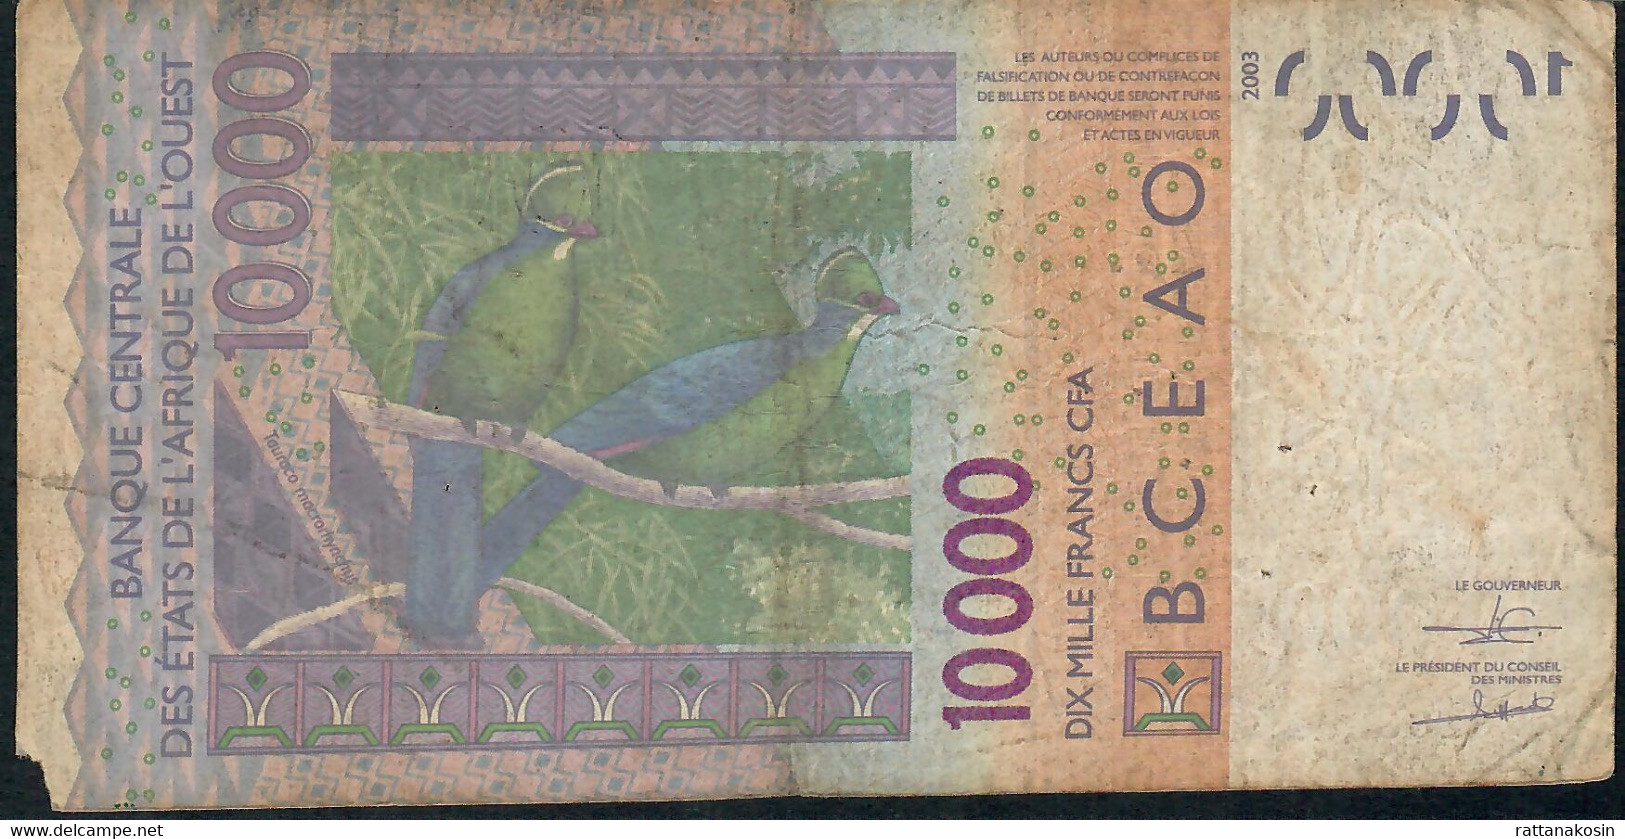 W.A.S. P718Kq 10000 Or 10.000 FRANCS (20)17 VG - West-Afrikaanse Staten